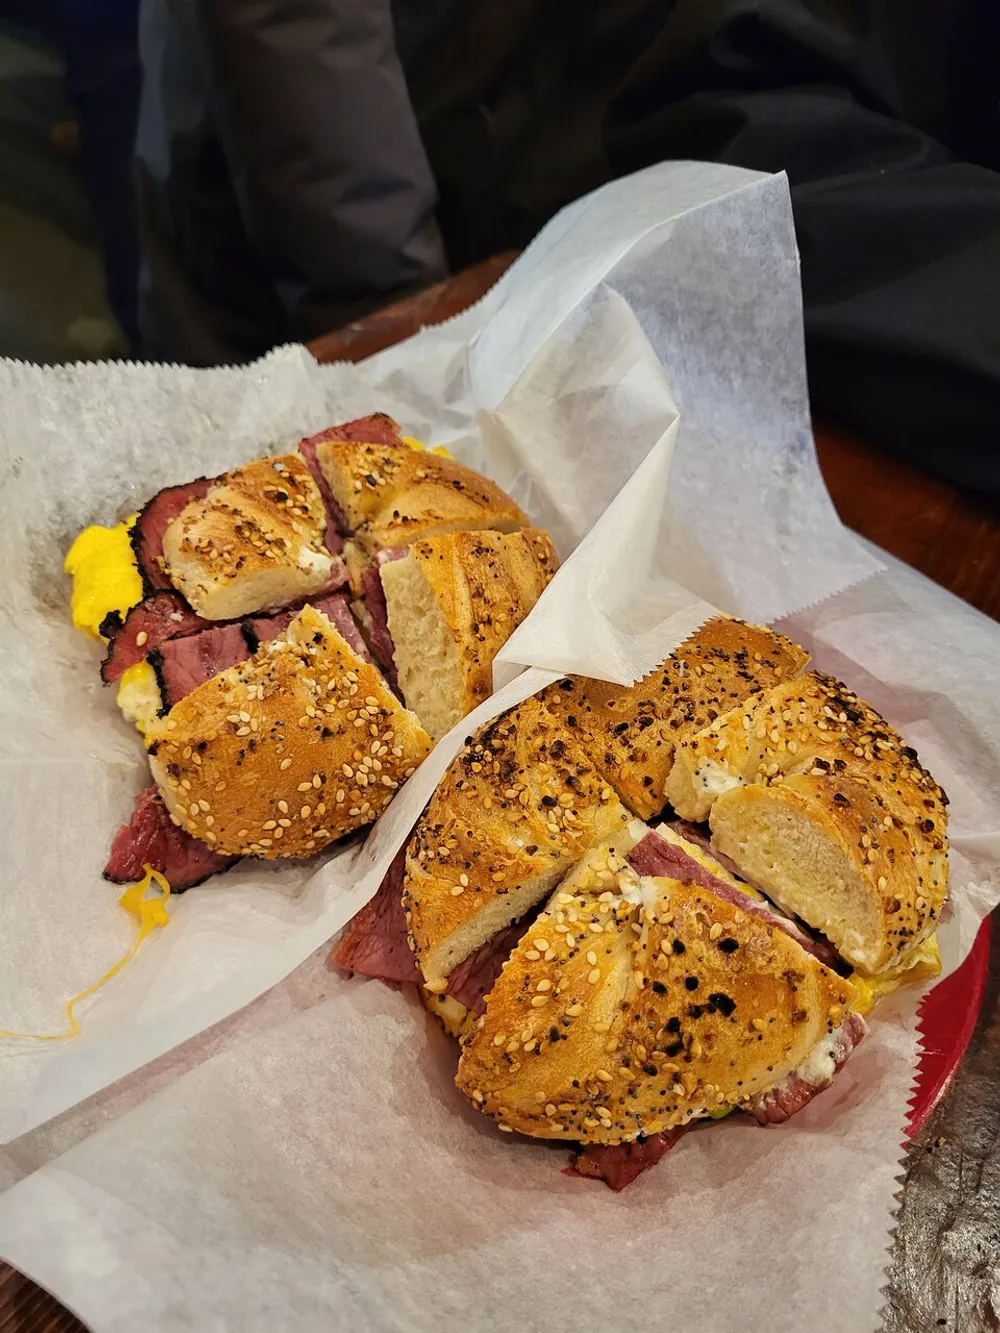 The image showcases a sliced bagel sandwich with beef and mustard on a piece of wax paper with a person partly visible in the background